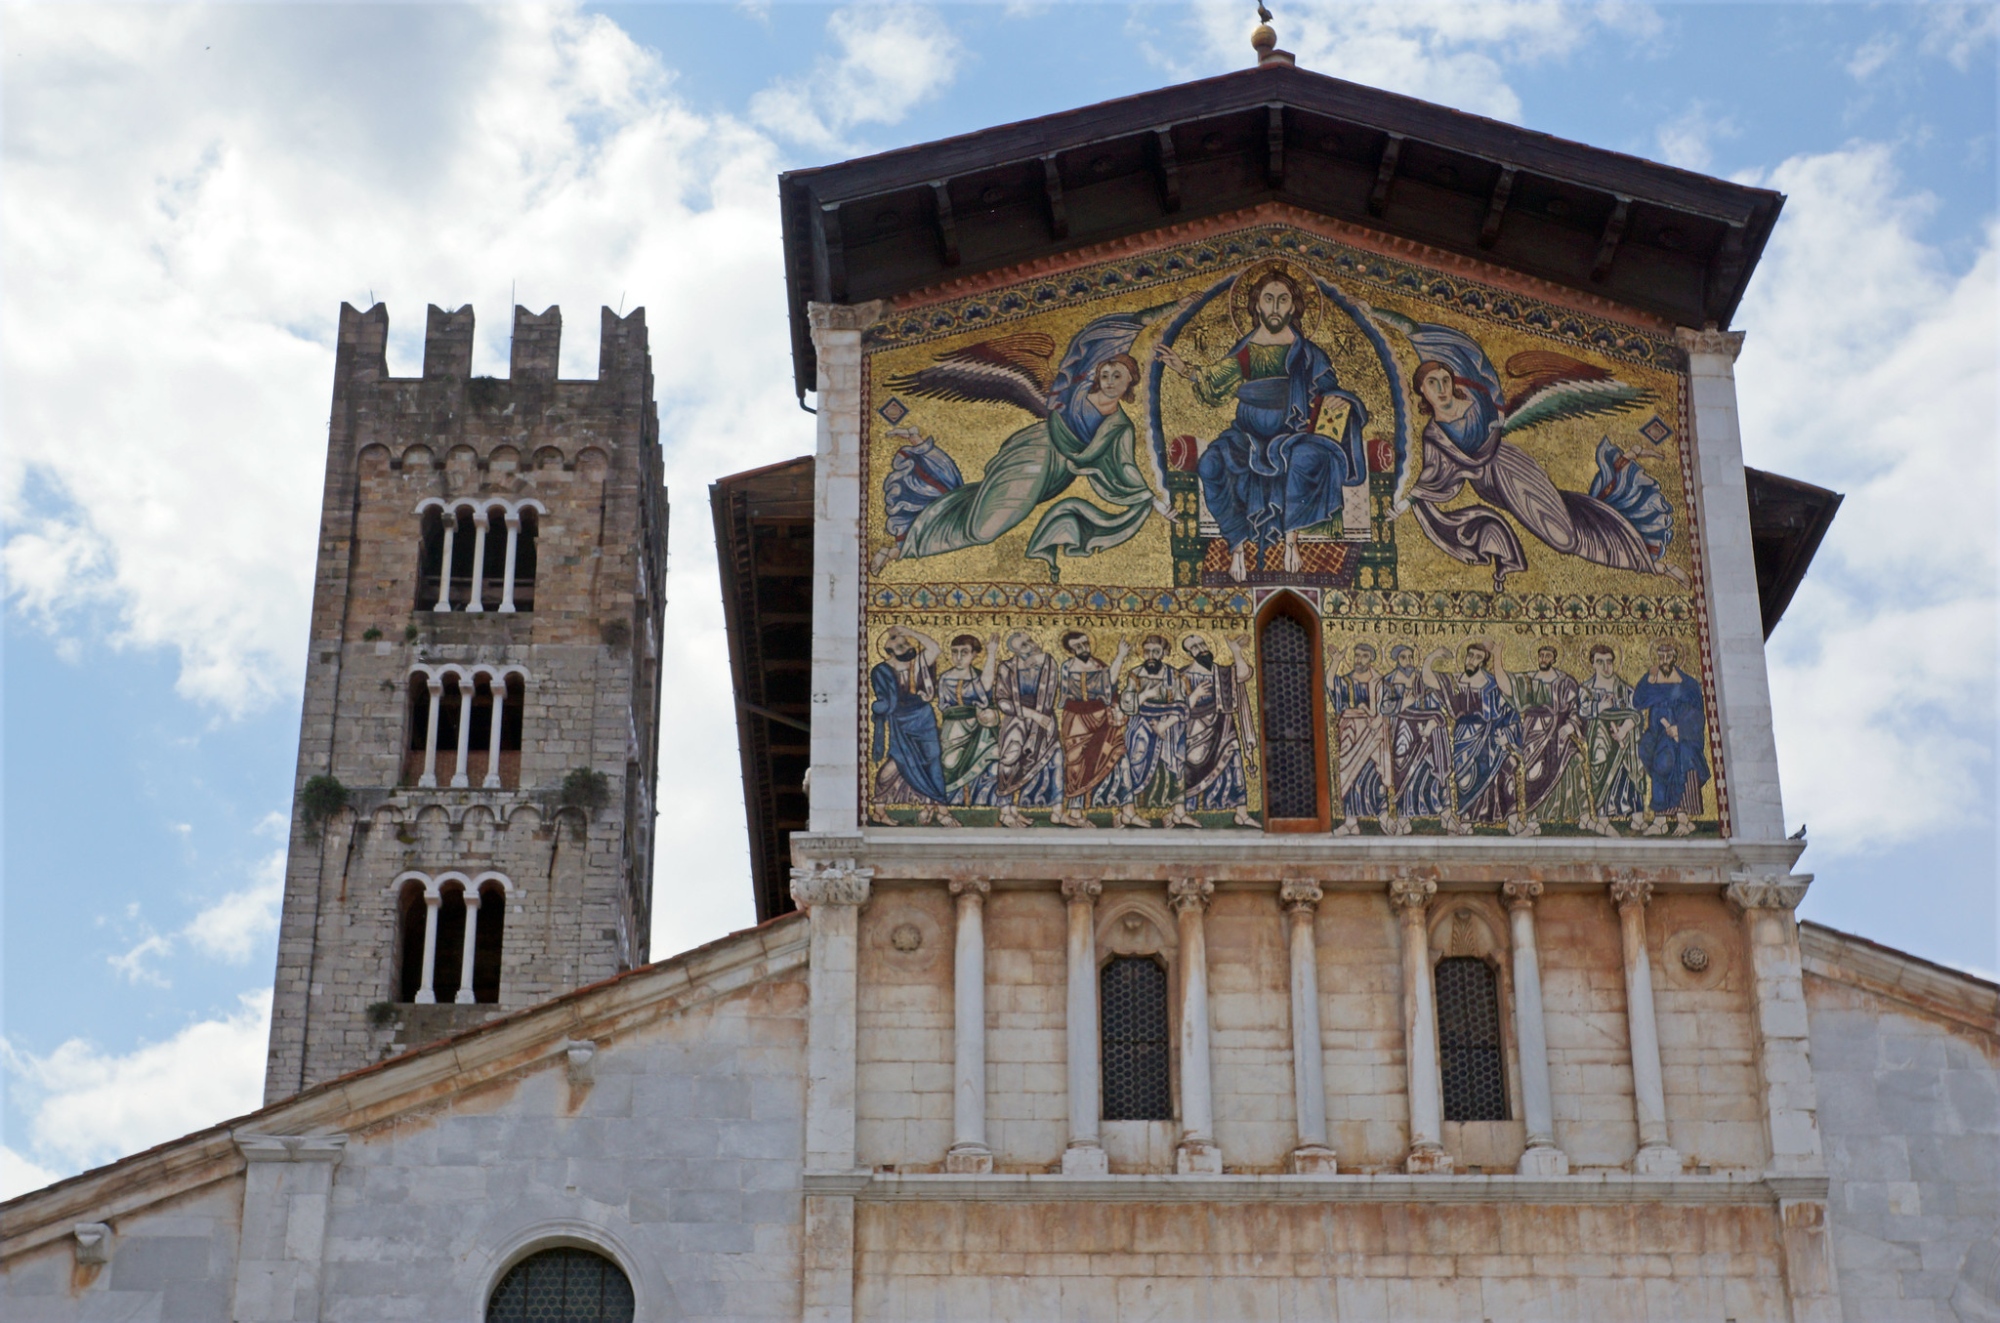 The mosaic on the facade of the Basilica